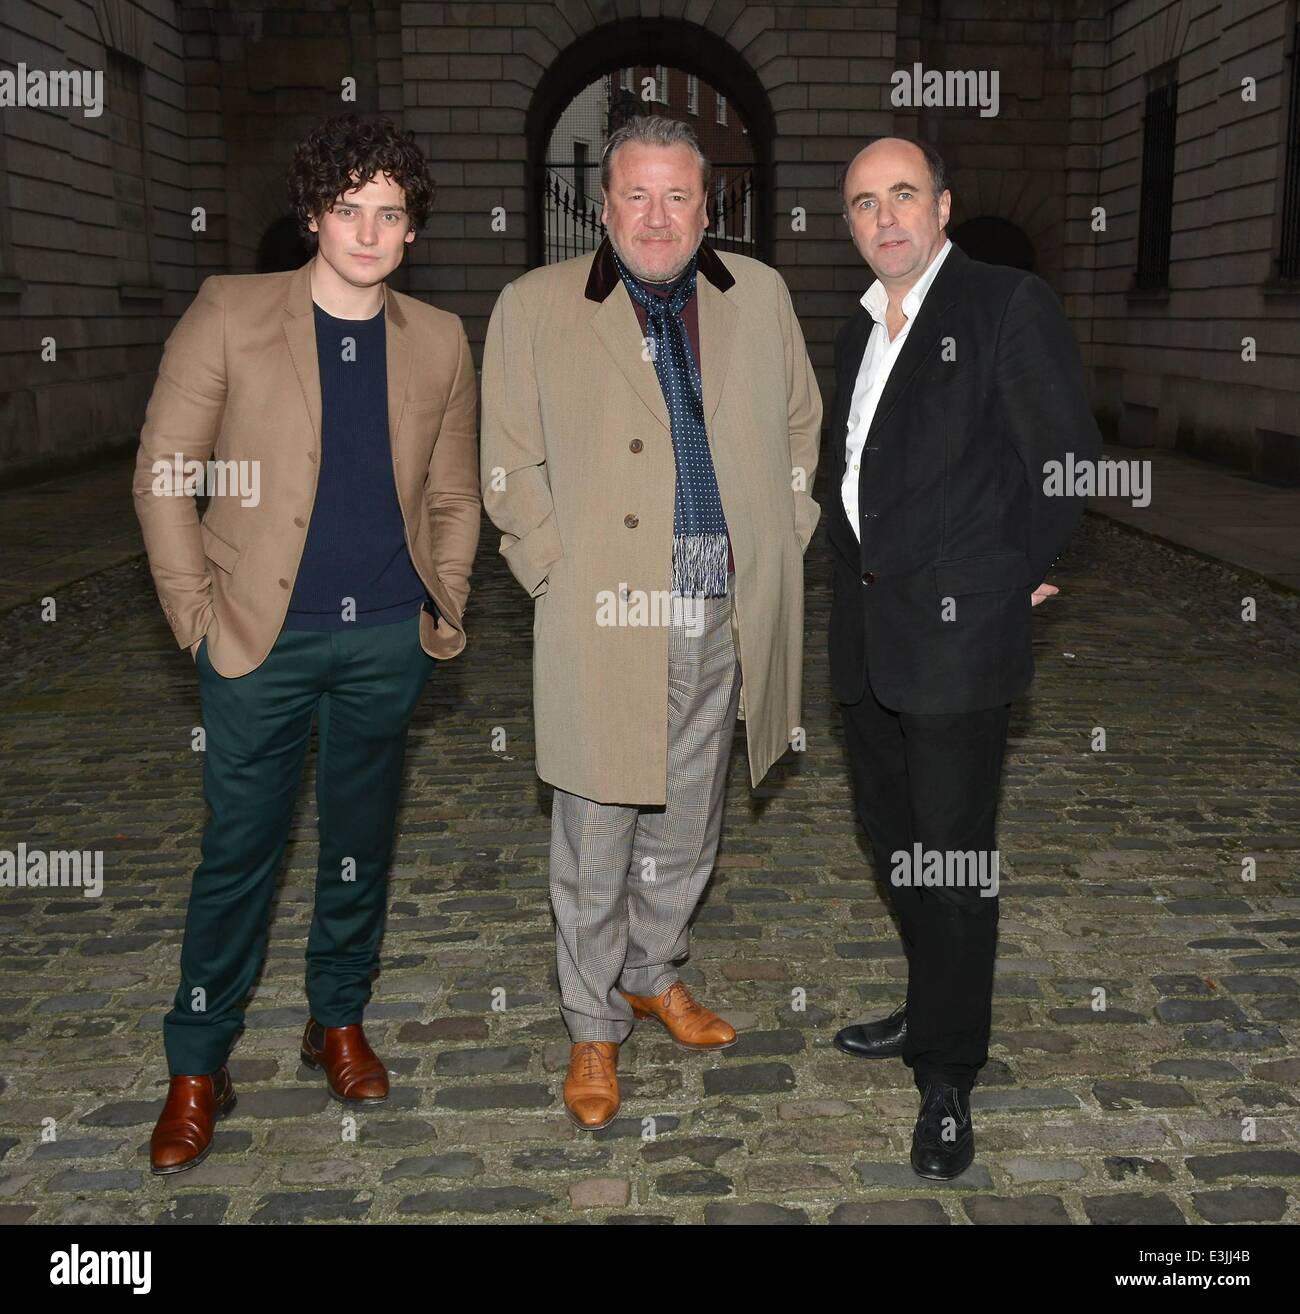 Actor Ray Winstone attends a screening of Sky 1 HD smuggler drama 'Moonfleet' with fellow cast members Aneurin Barnard & Lorcan Cranitch at Kings Inn...  Featuring: Aneurin Barnard,Ray Winstone,Lorcan Cranitch Where: Dublin, Ireland When: 02 Dec 2013 Stock Photo